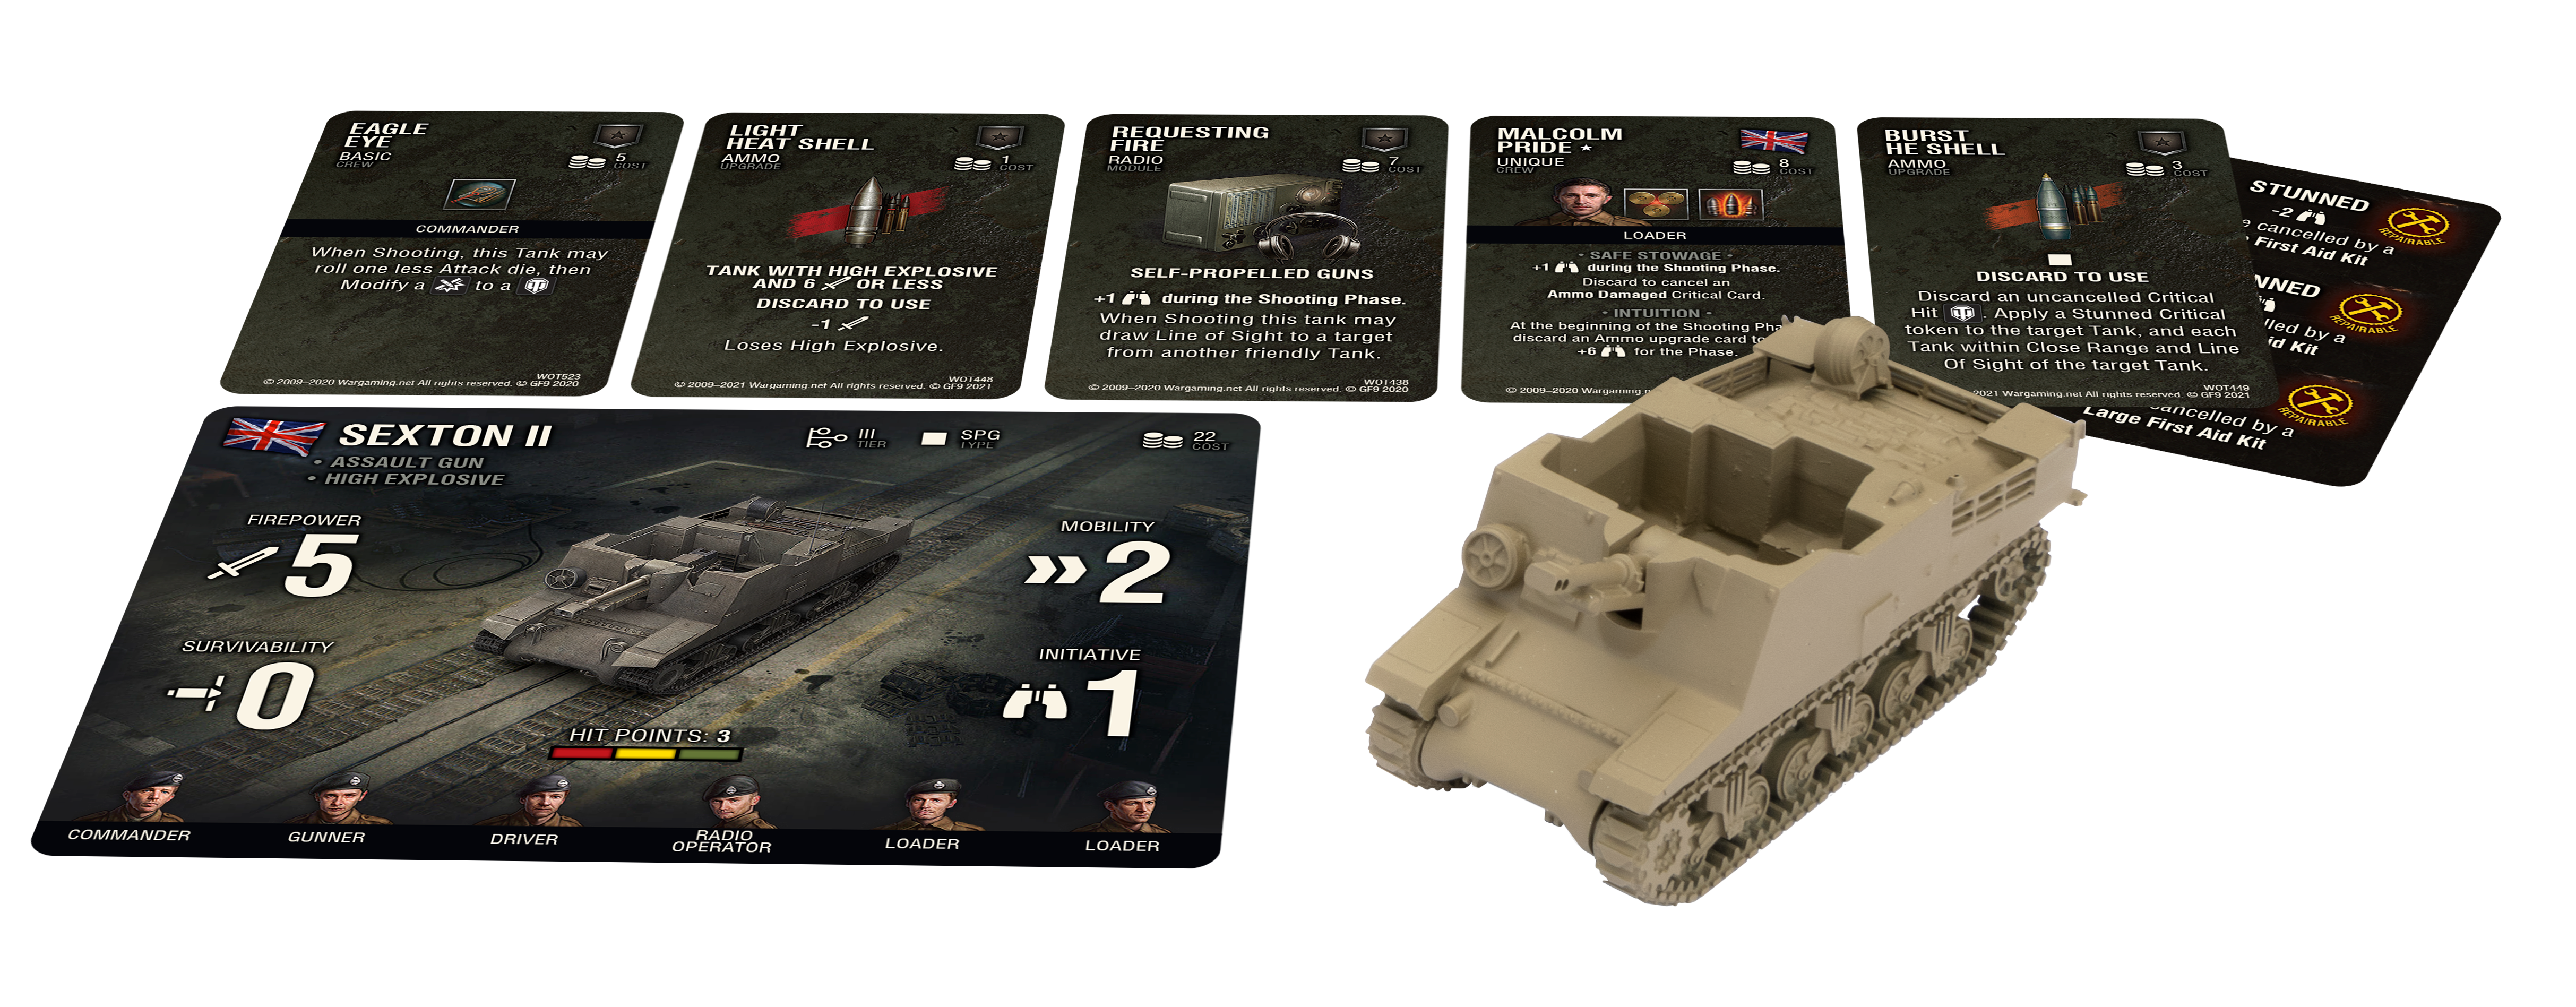 Sexton II and Tank Cards